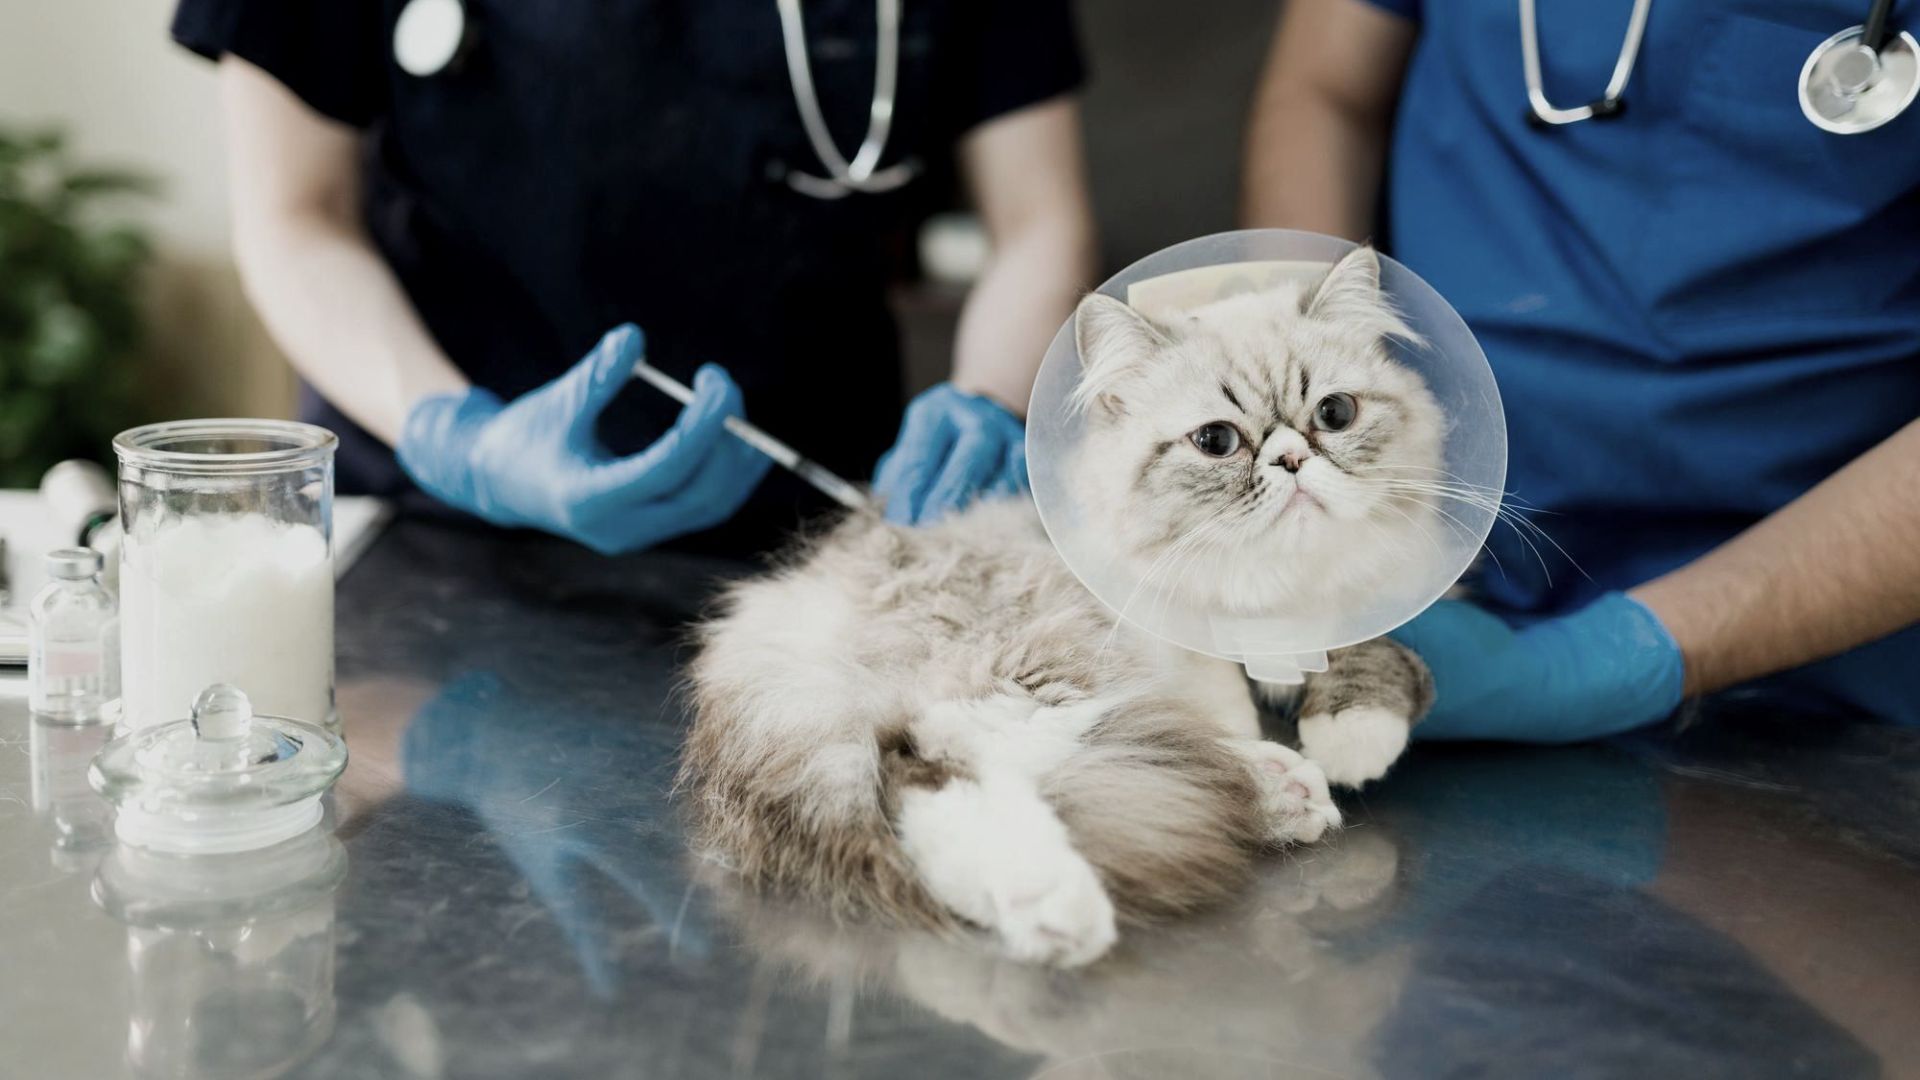 a sick persian cat lying at the examination table while a woman and man vet put on a vaccine or medicine with